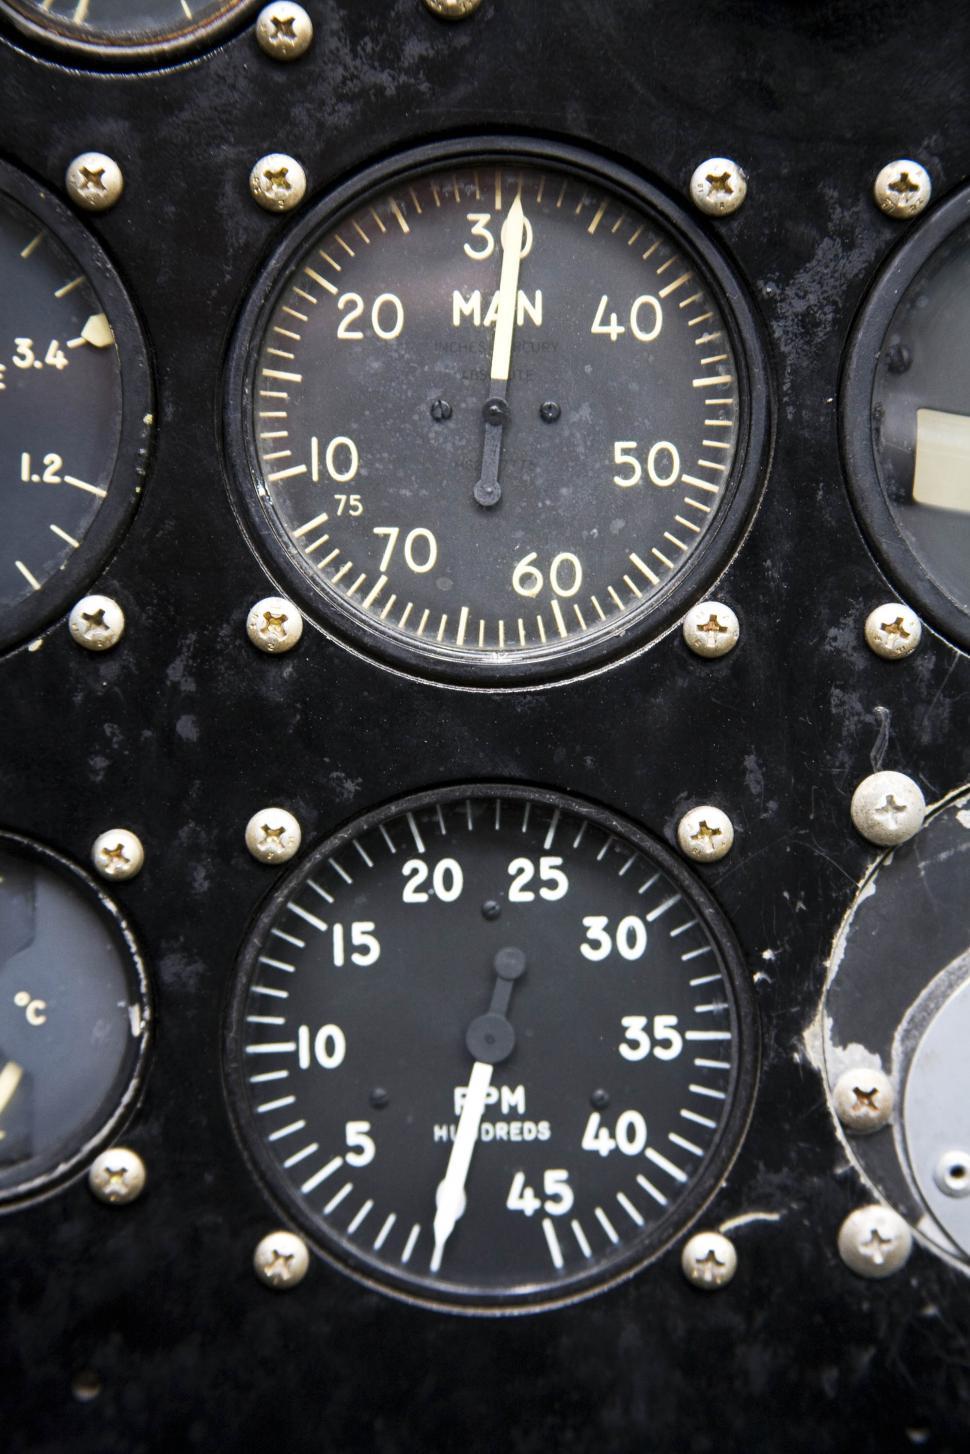 Free Image of different aircraft gauges 